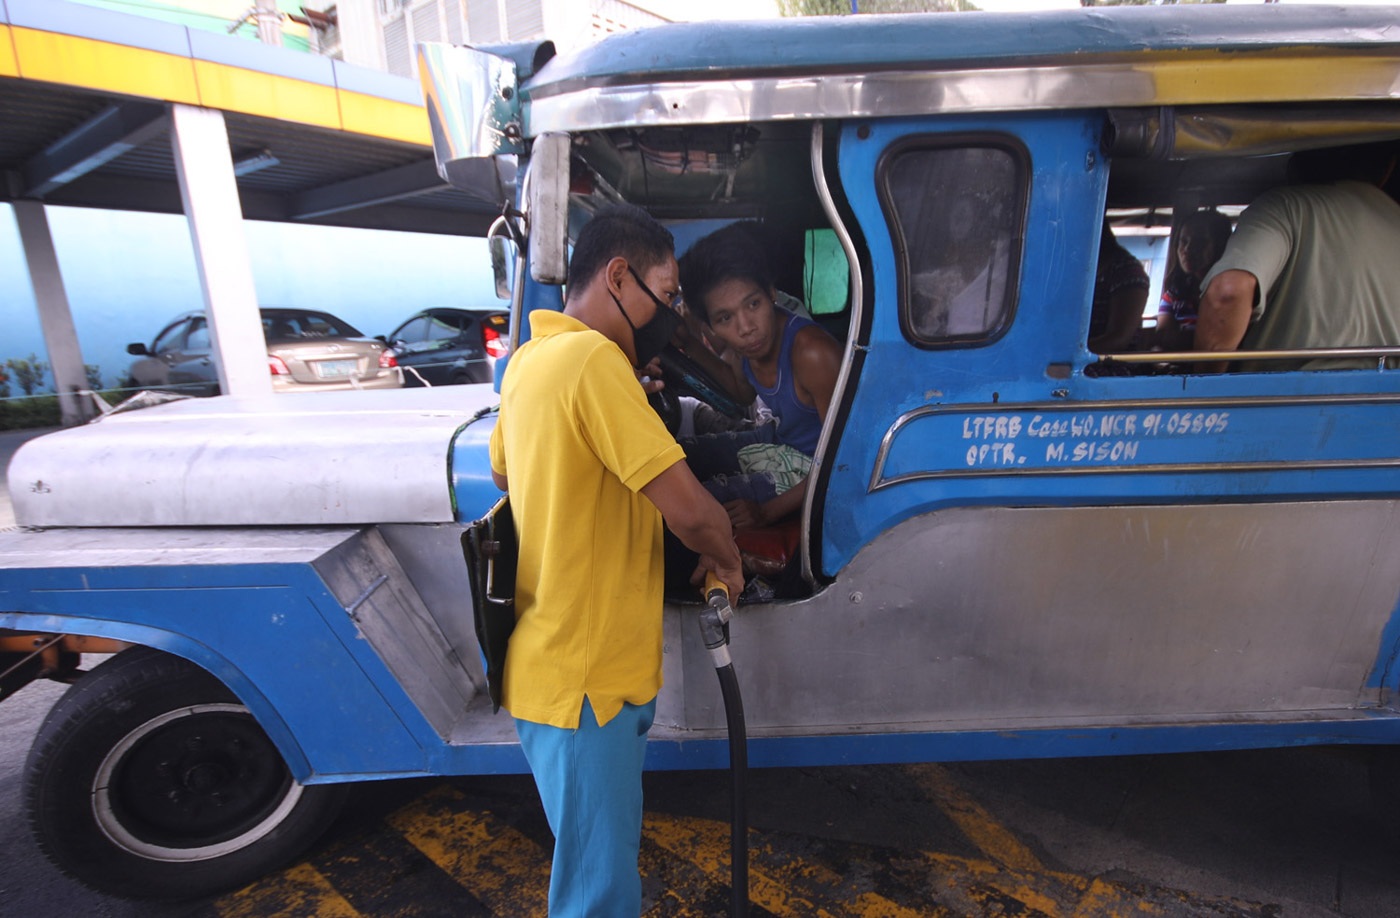 OIL. A gas station attendant fills up a passengers jeepney with fuel at a station in Commonwealth Ave in Quezon City on Sunday, November 4, 2018. Photo by Darren Langit/Rappler  